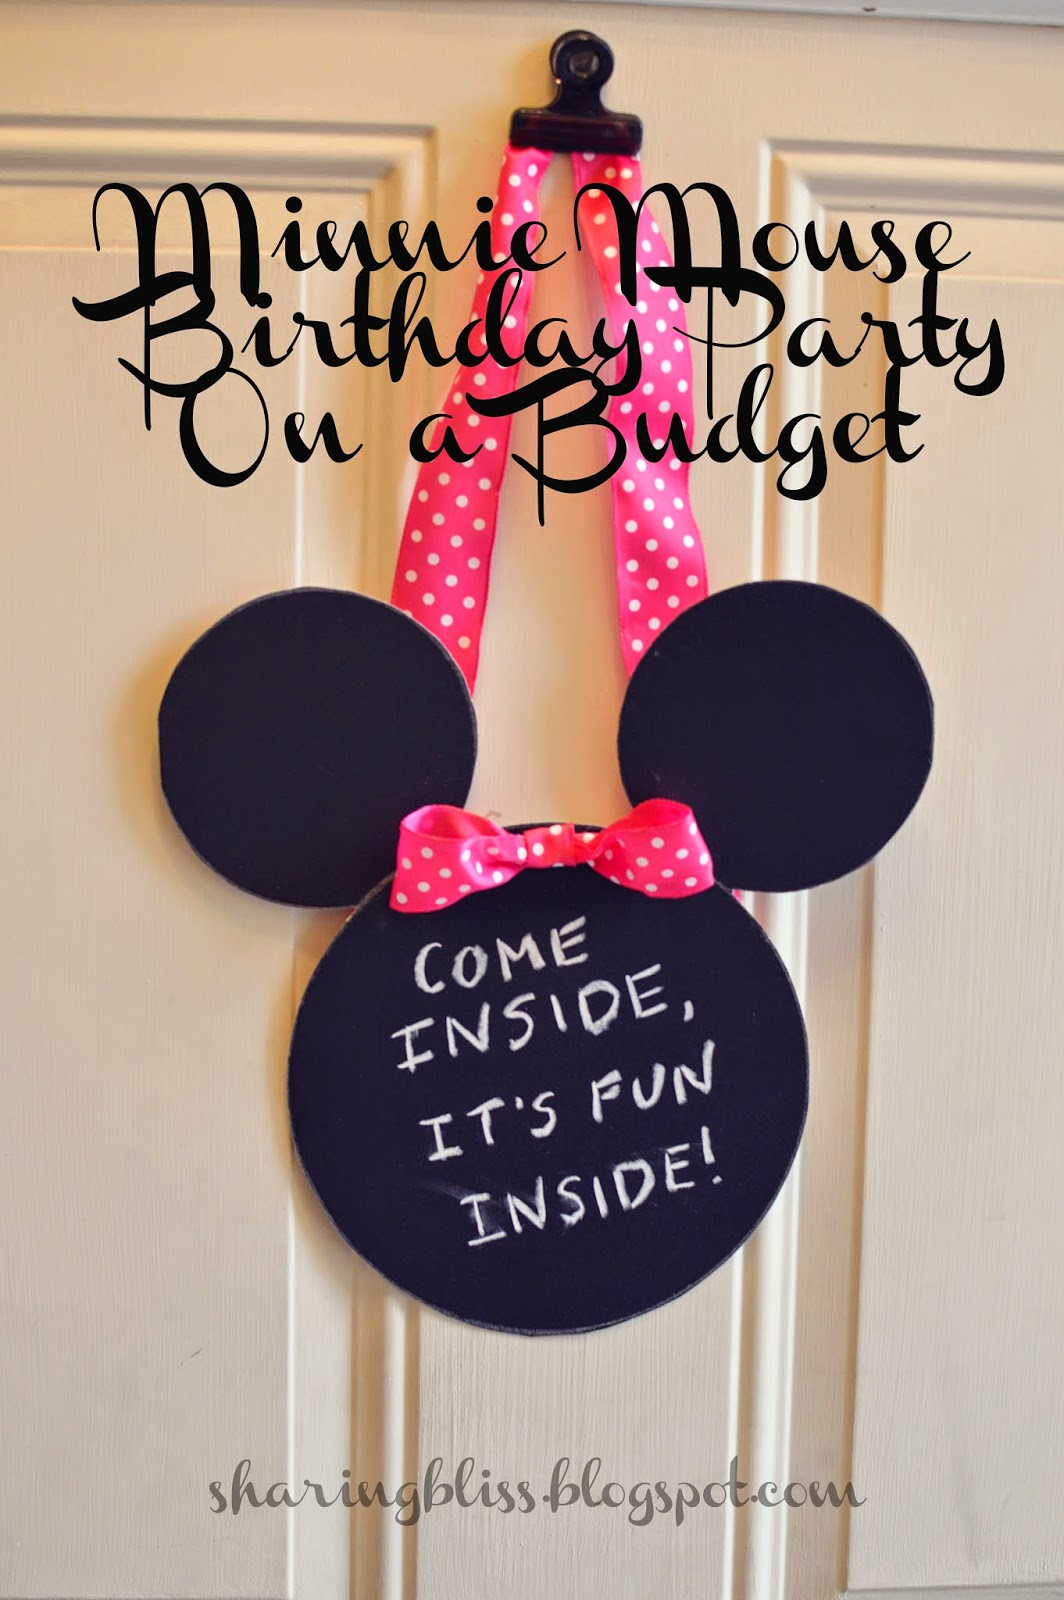 Minnie Mouse Birthday Party Decorations
 Minnie Mouse Birthday Party on a Bud